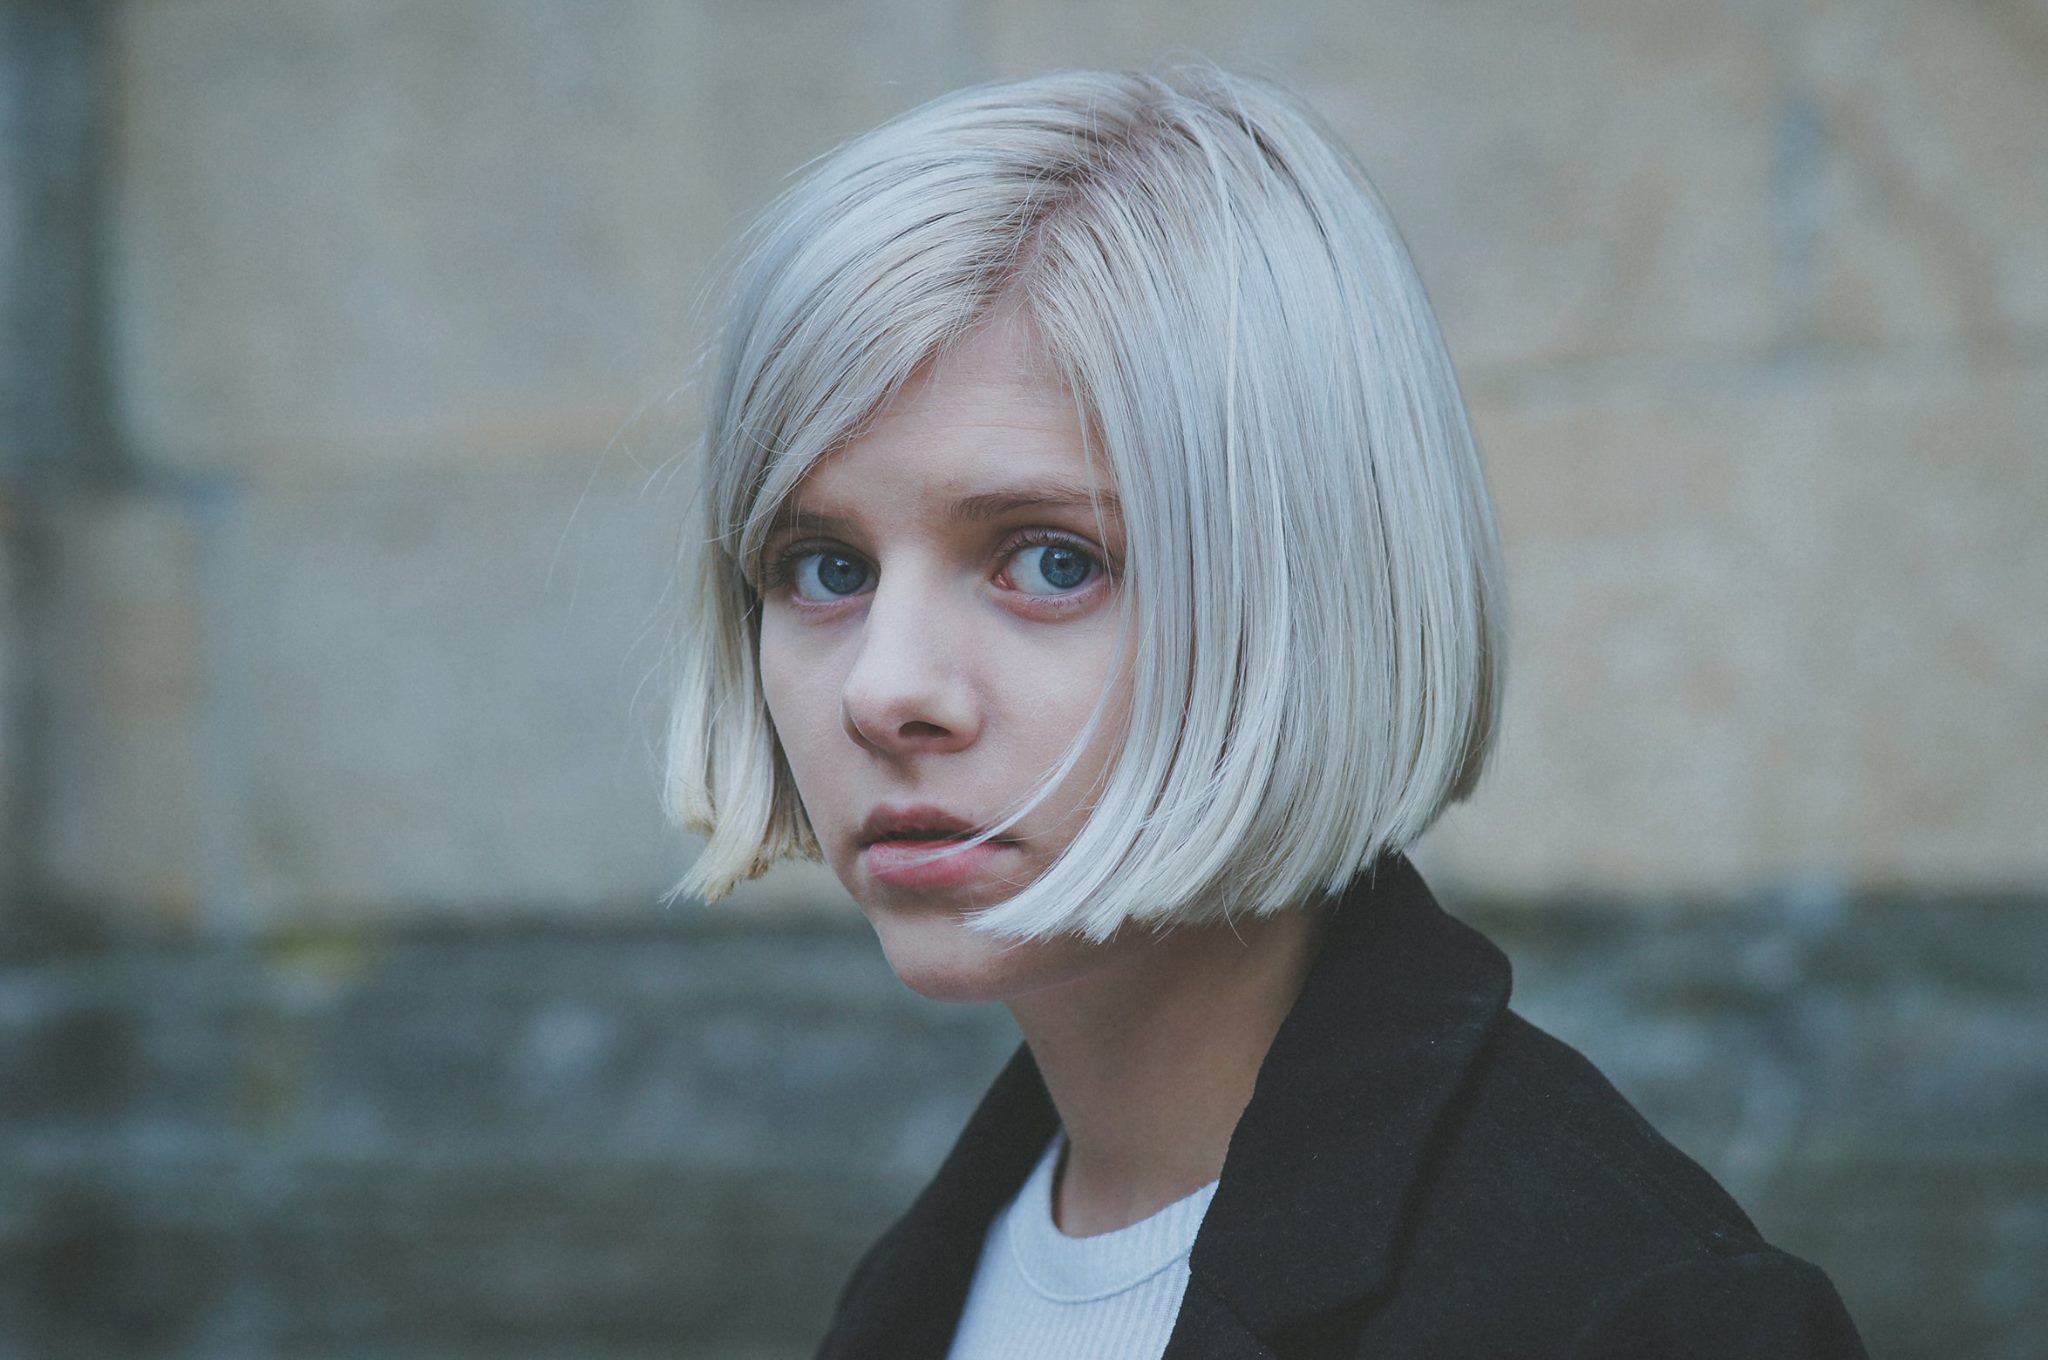 Aurora releases new album, "All My Demons Greeting Me as a ...